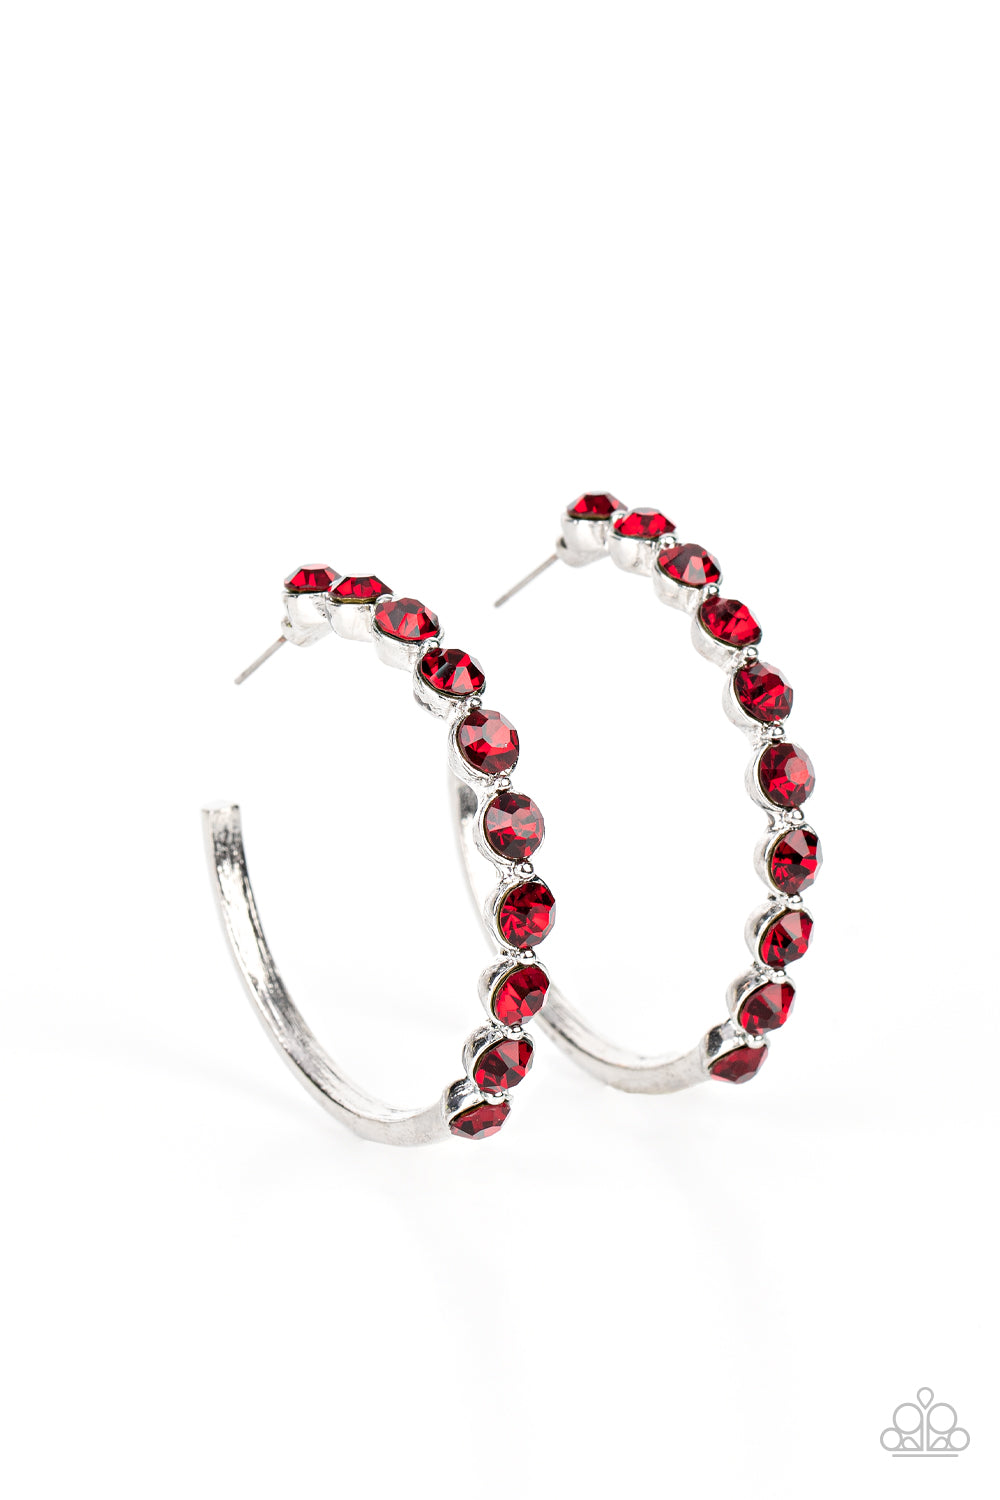 Earrings - Photo Finish - Red